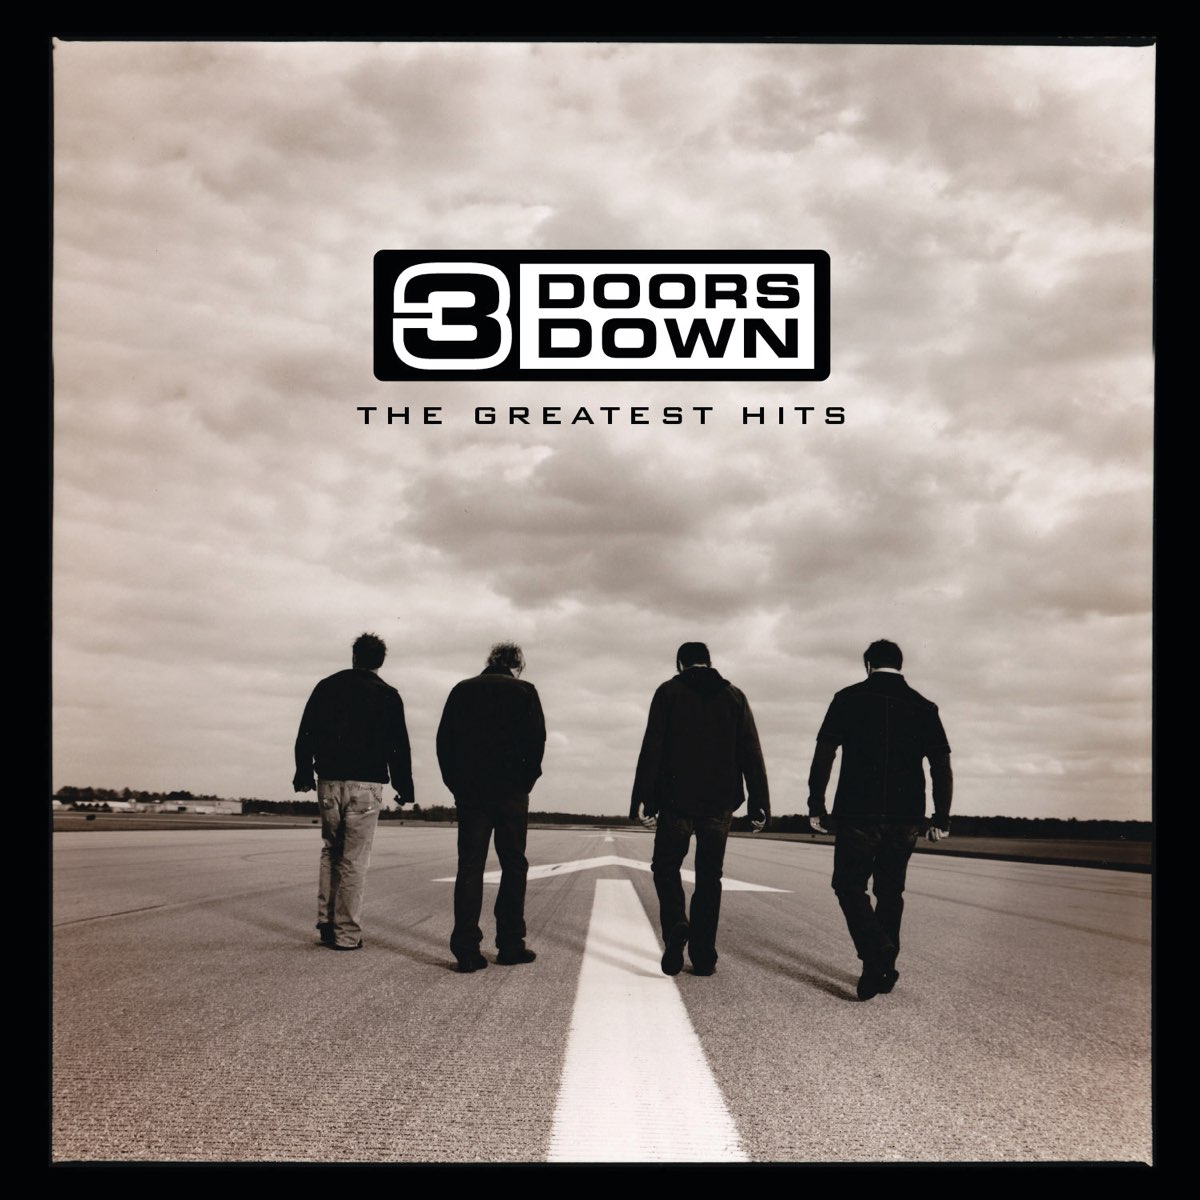 ‎The Greatest Hits by 3 Doors Down on Apple Music